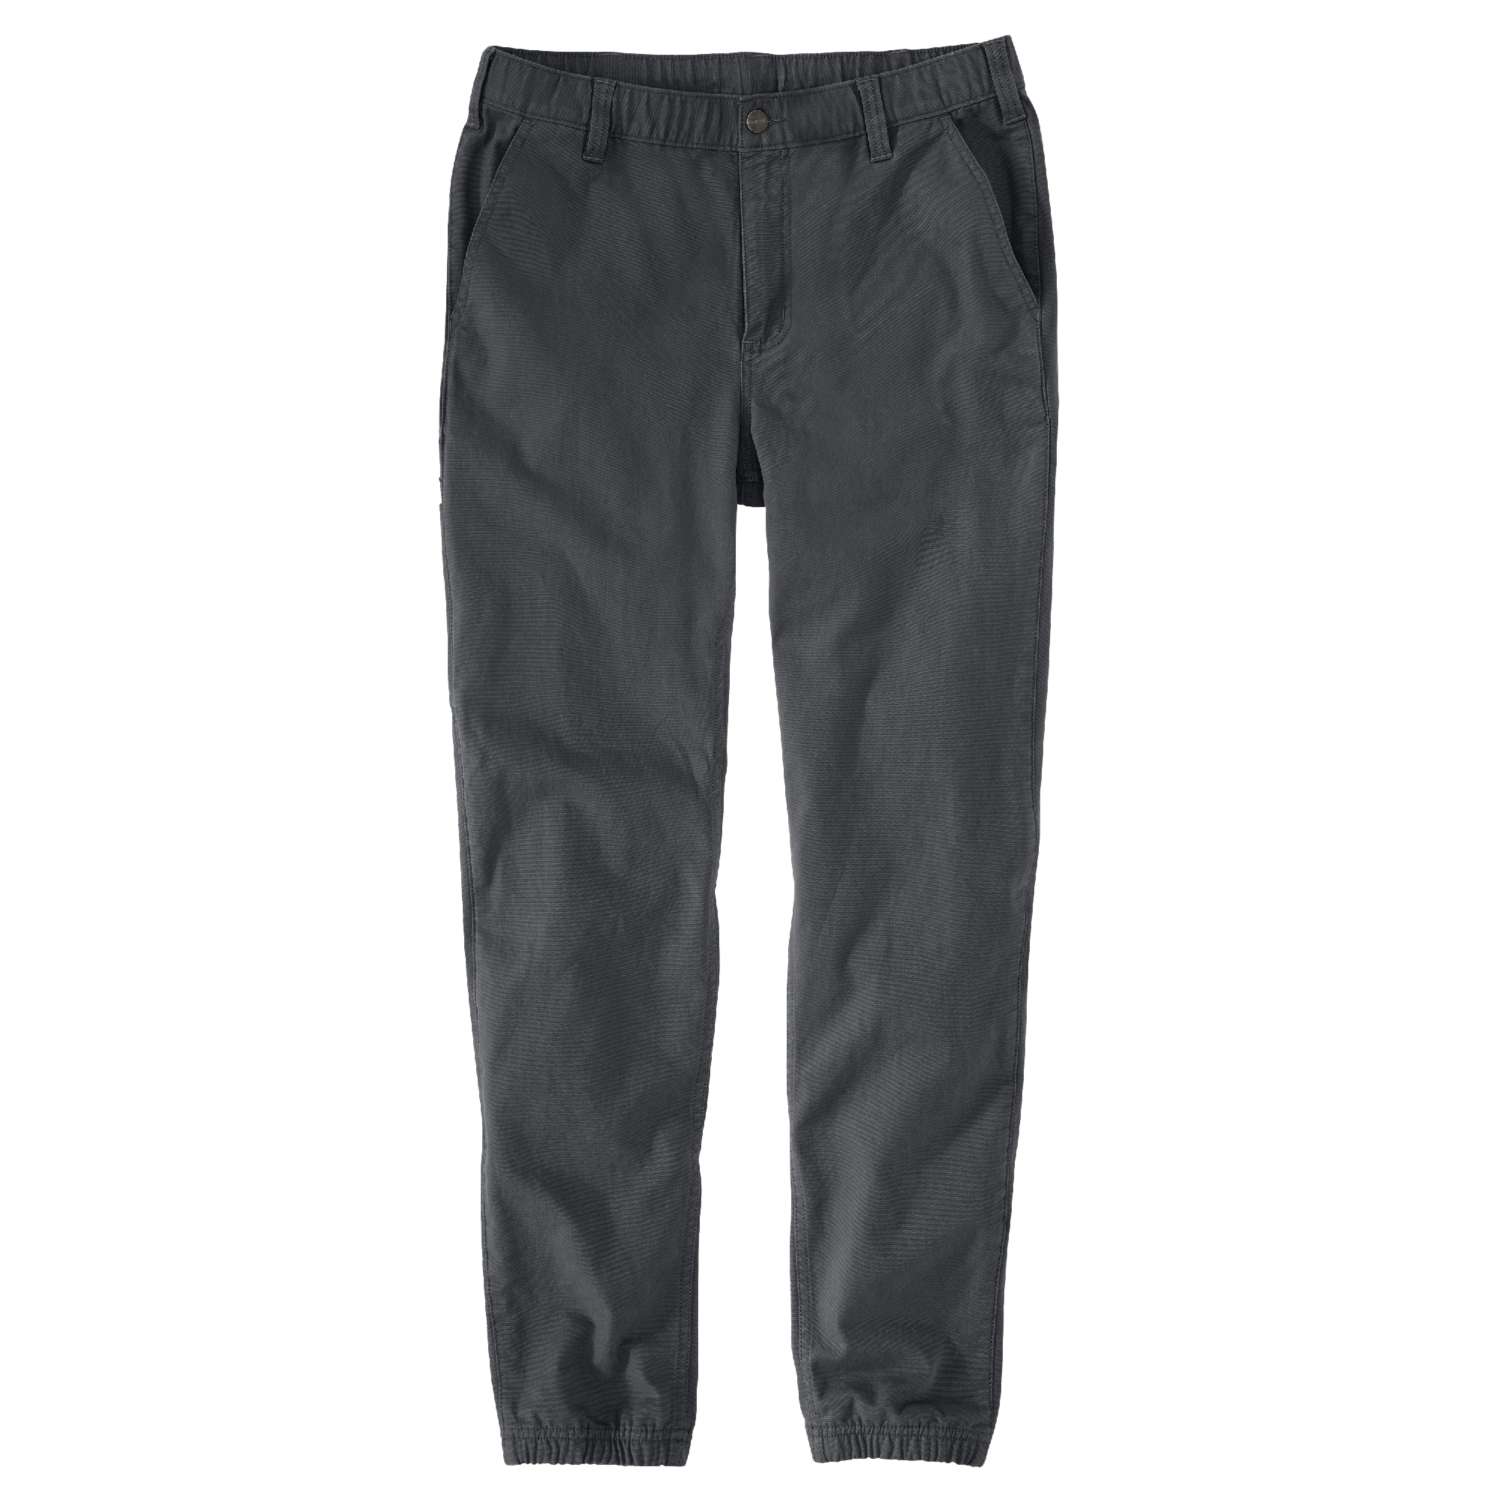 RELAXED_FIT_CANVAS_JOGGER_PANT_0jFc5mnxVY